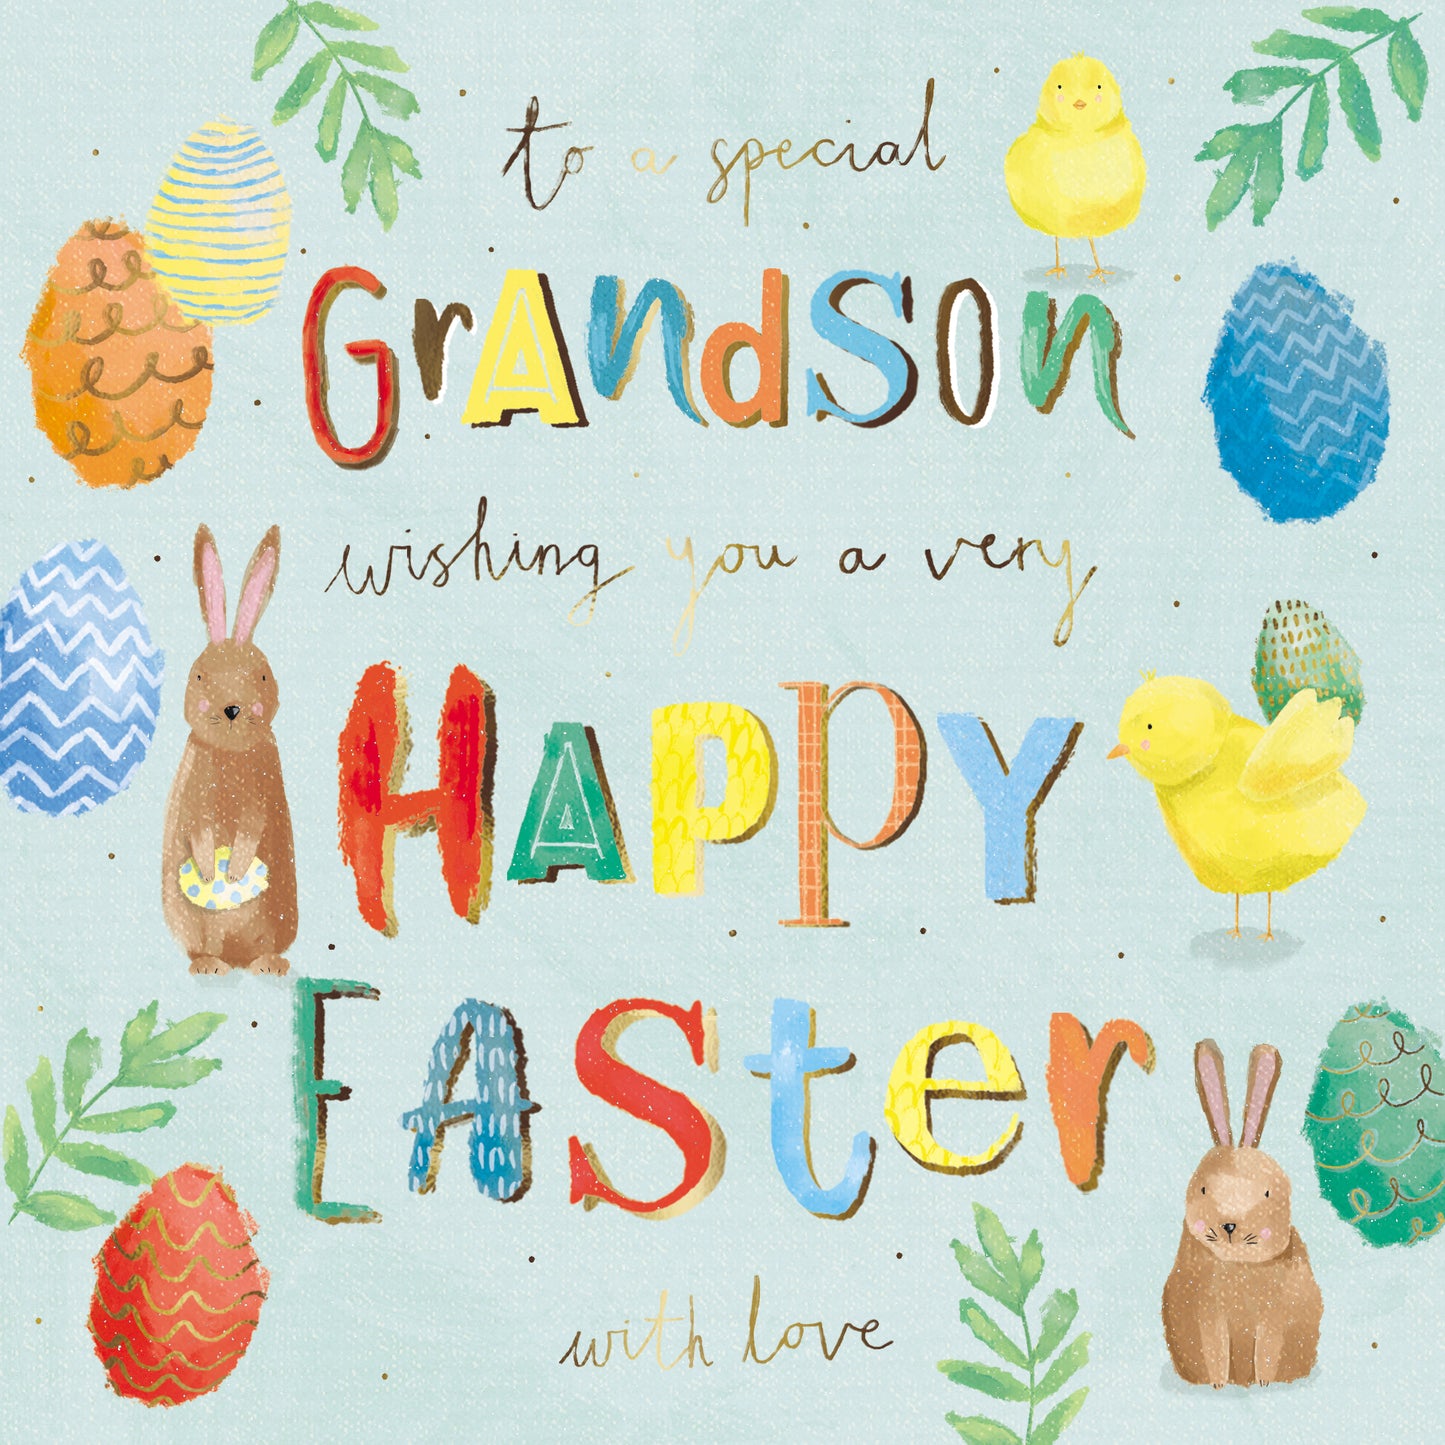 To A Special Grandson Eggscellent Bunnies Artistic Easter Greeting Card